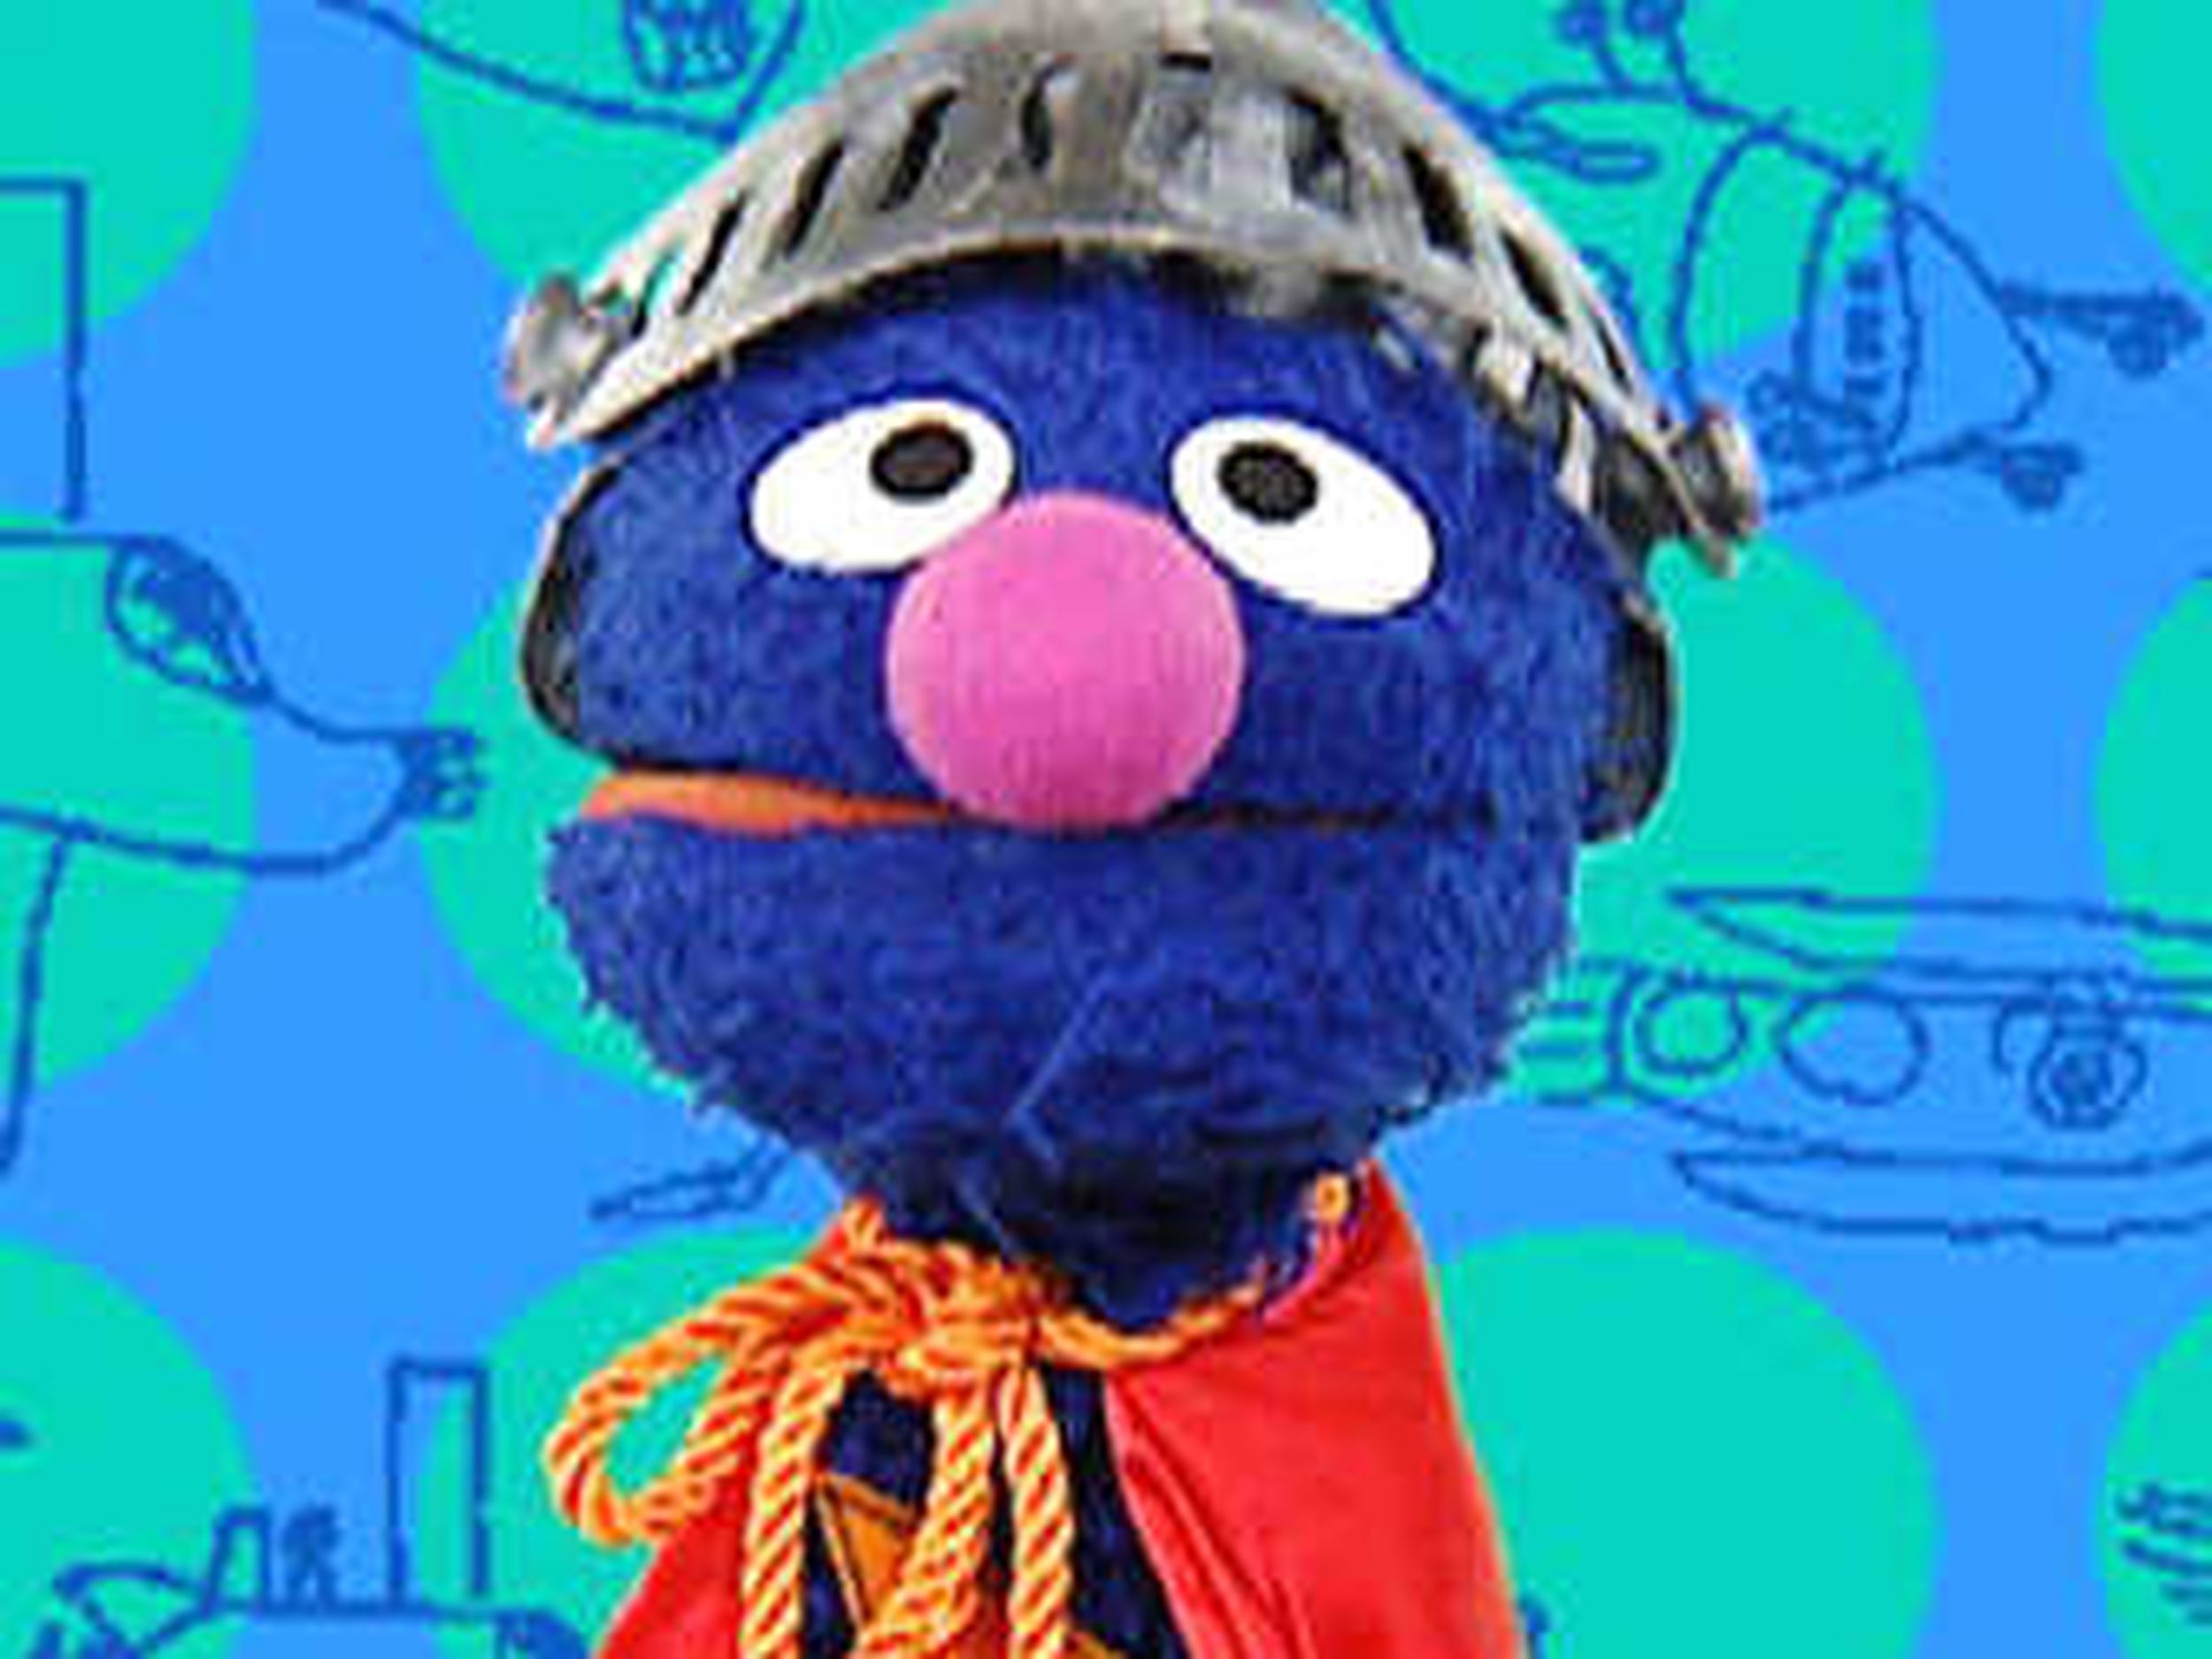 Grover from 'Sesame Street' dishes sweet smoothie